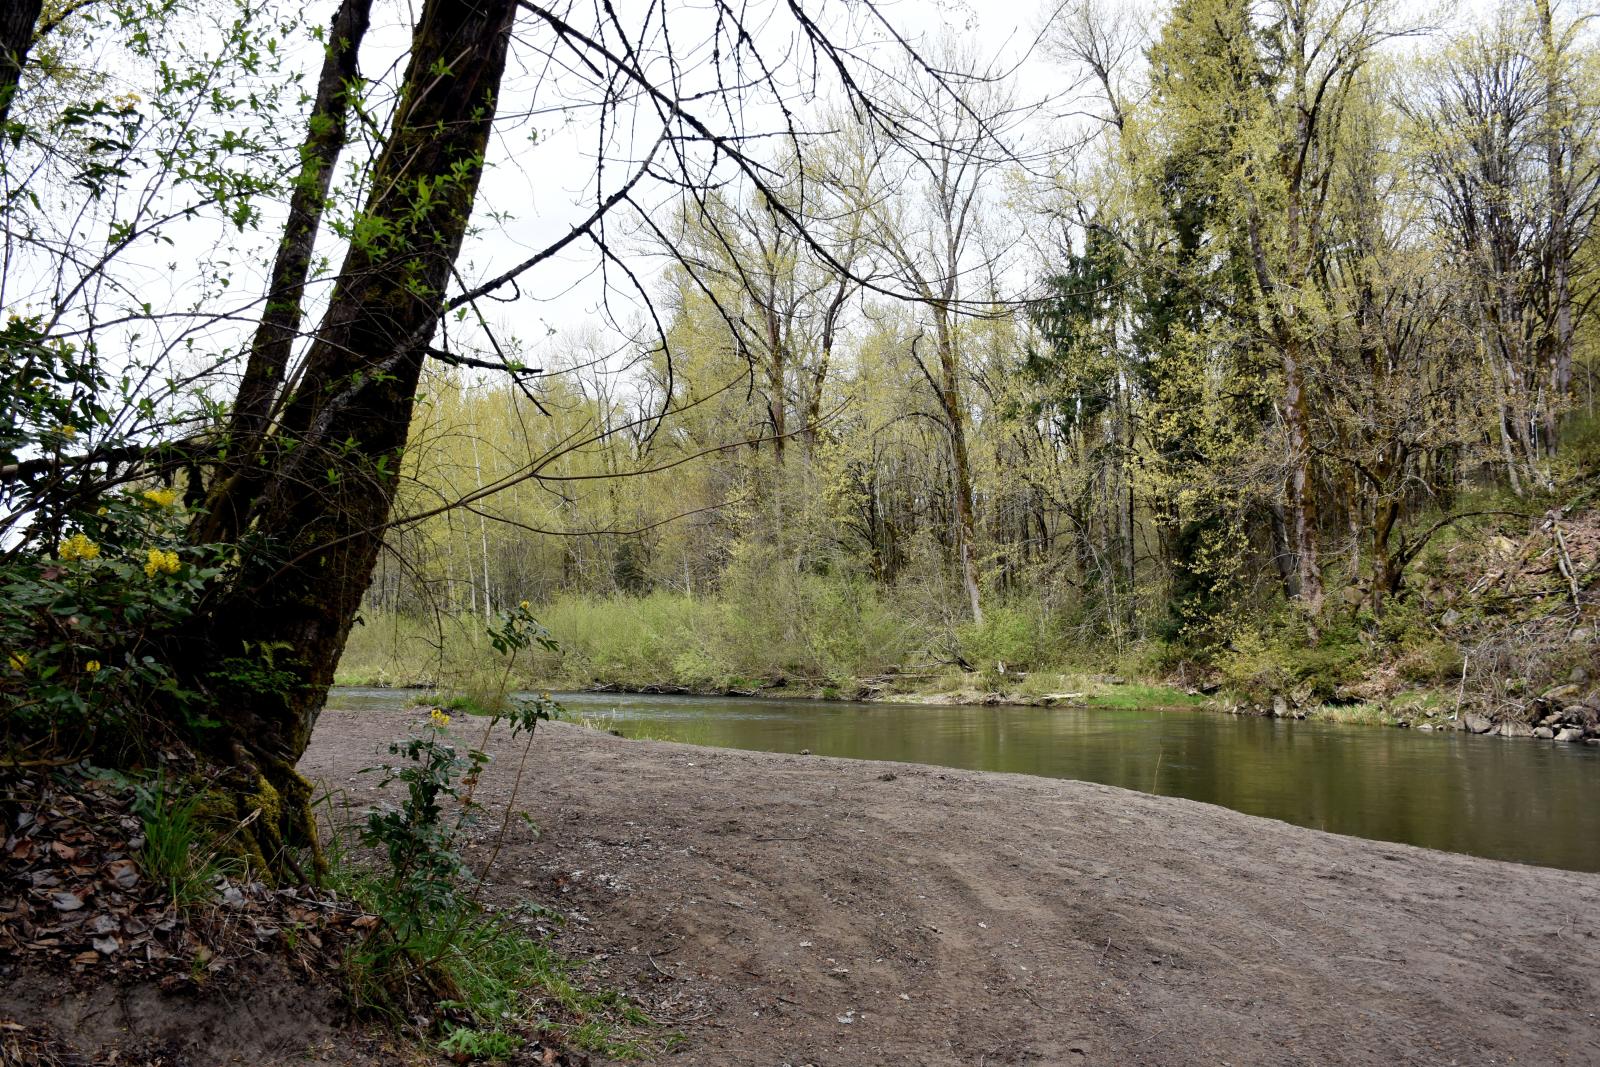 Handicap Hole Water Access Area along the Nisqually River